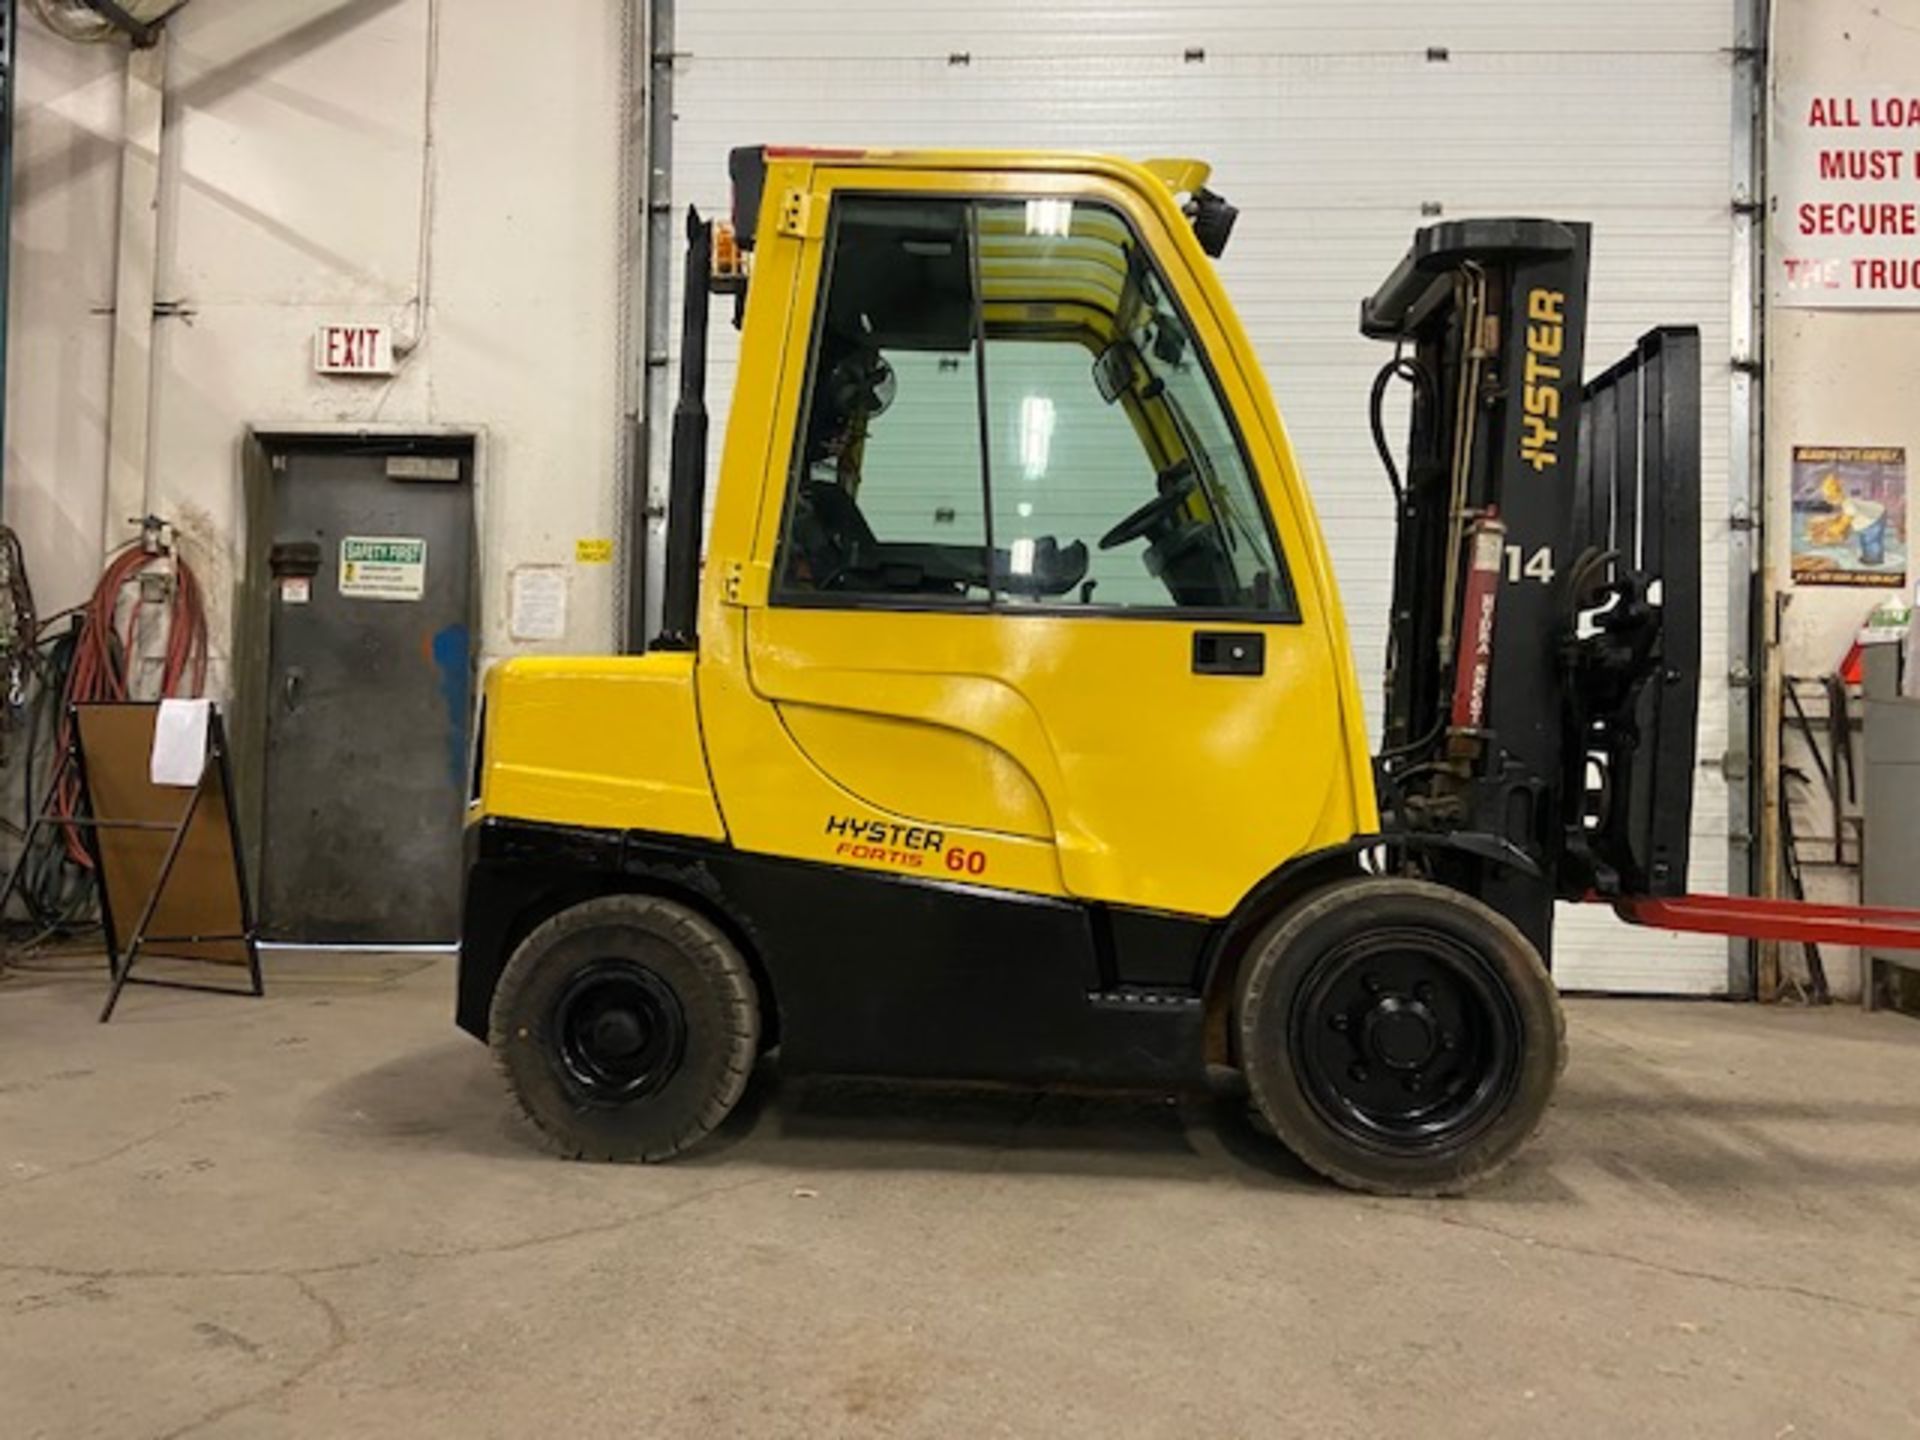 FREE CUSTOMS - 2015 Hyster 6000lbs capacity OUTDOOR Diesel Forklift with 3-stage mast &